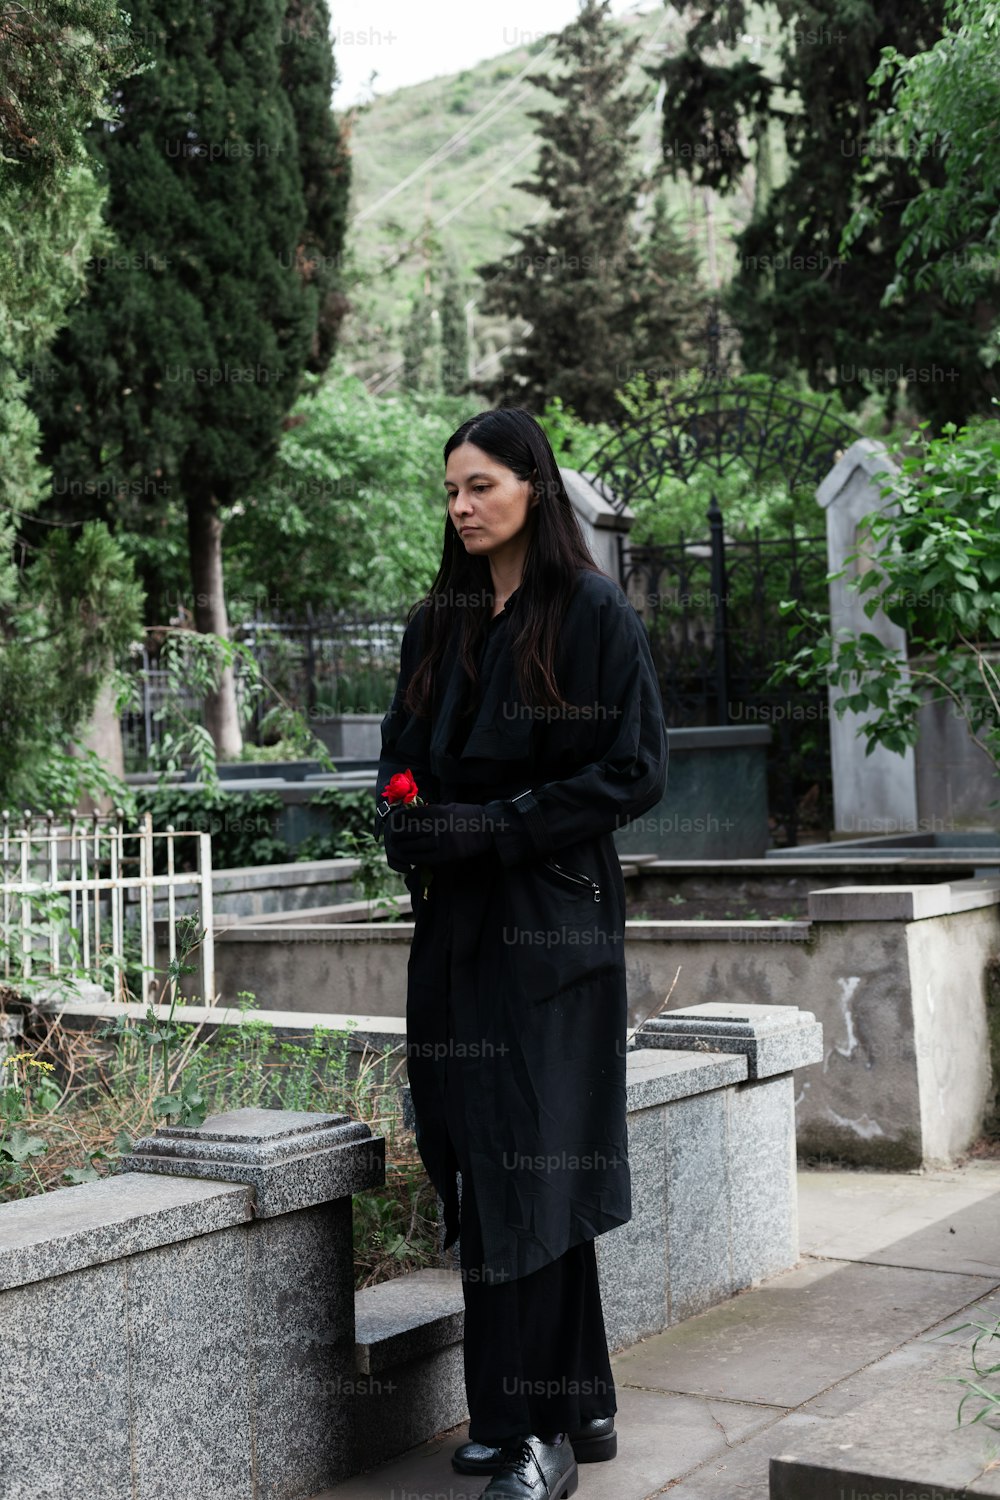 a woman in a long black coat standing on a stone bench